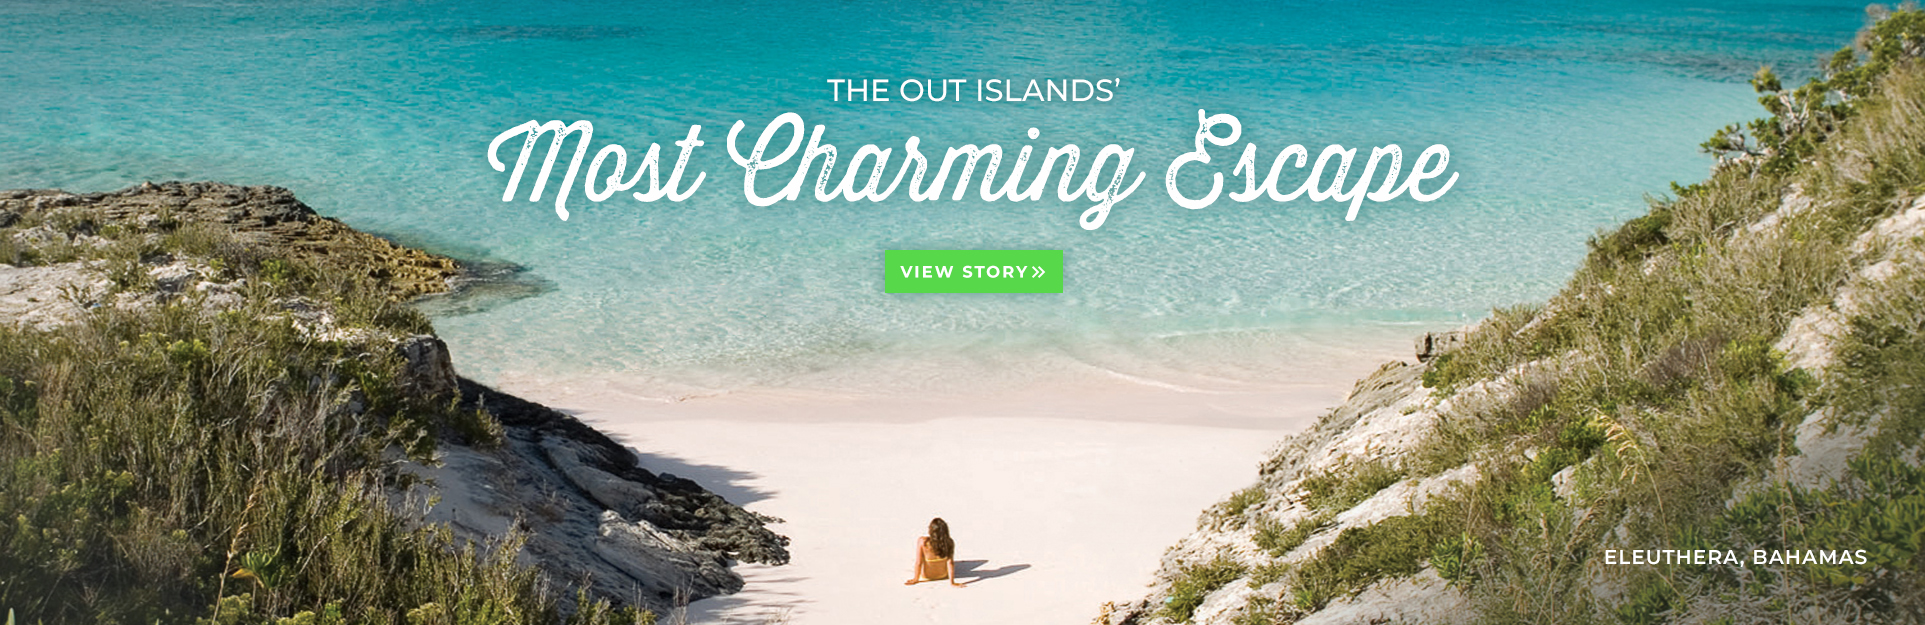 Most Charming Escape | Eleuthera, Bahamas | The Out Islands. View Story